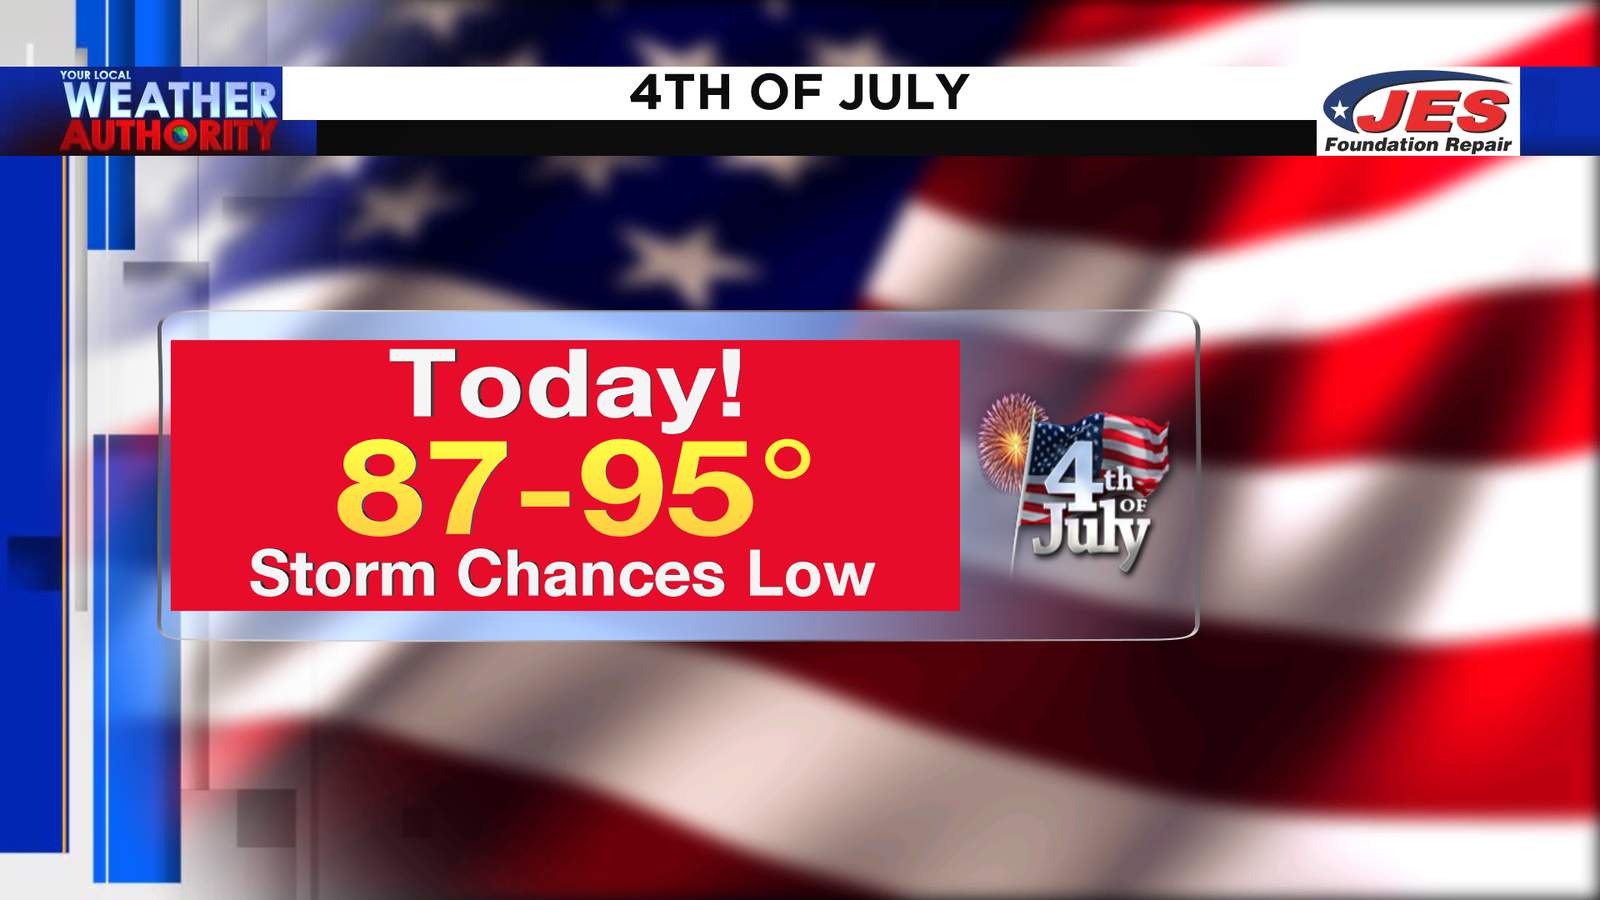 Heating up with the chance of Mother Nature’s fireworks staying low this Independence Day